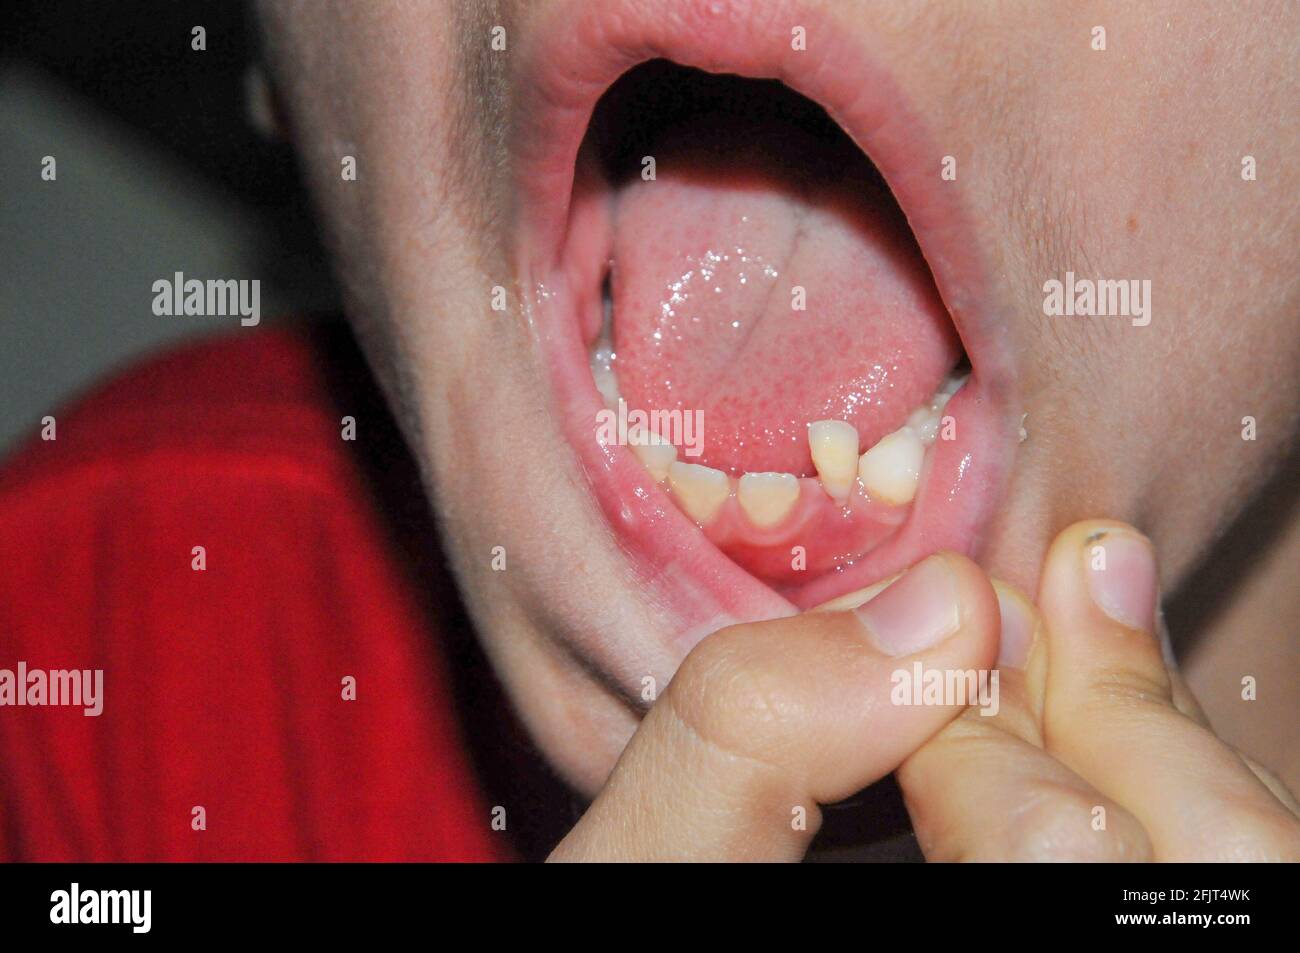 Young boy of six with a loose bottom tooth and missing two front teeth Stock Photo